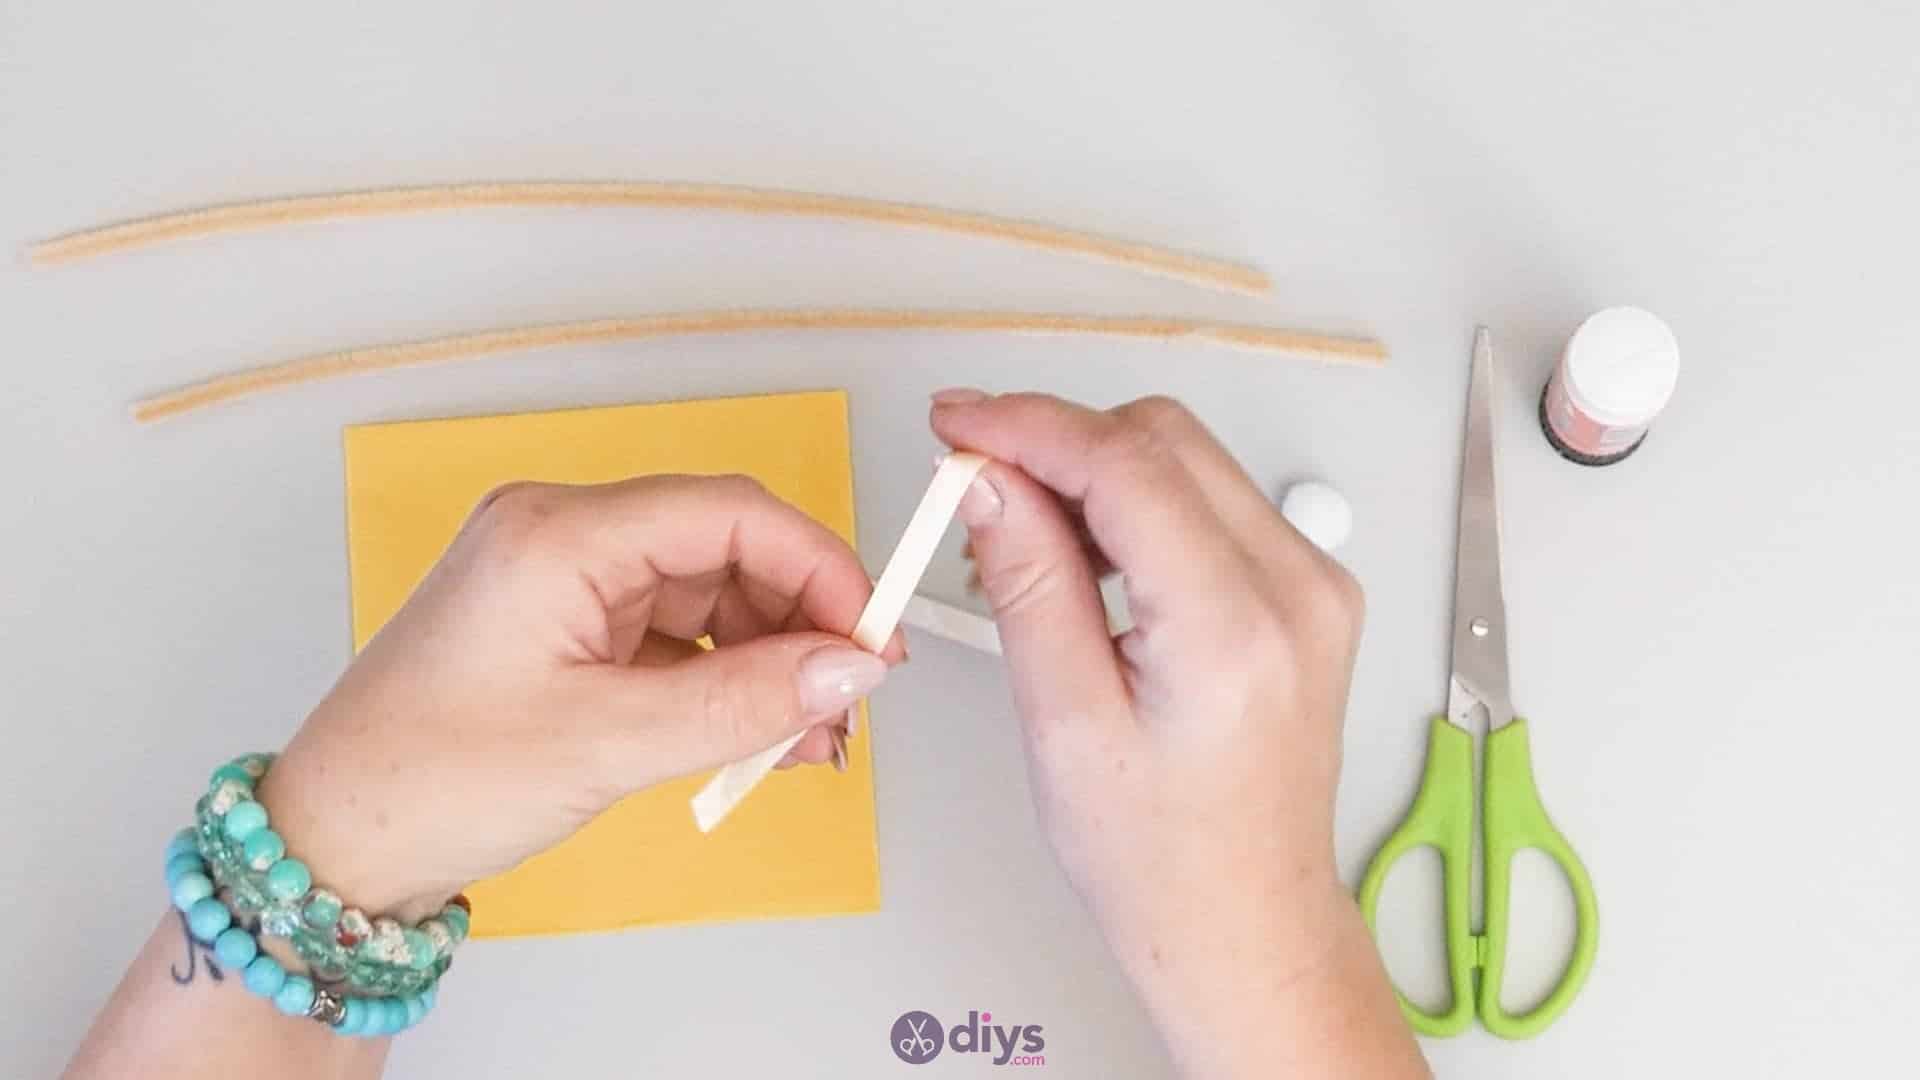 How to make a dancing napkin puppet step2